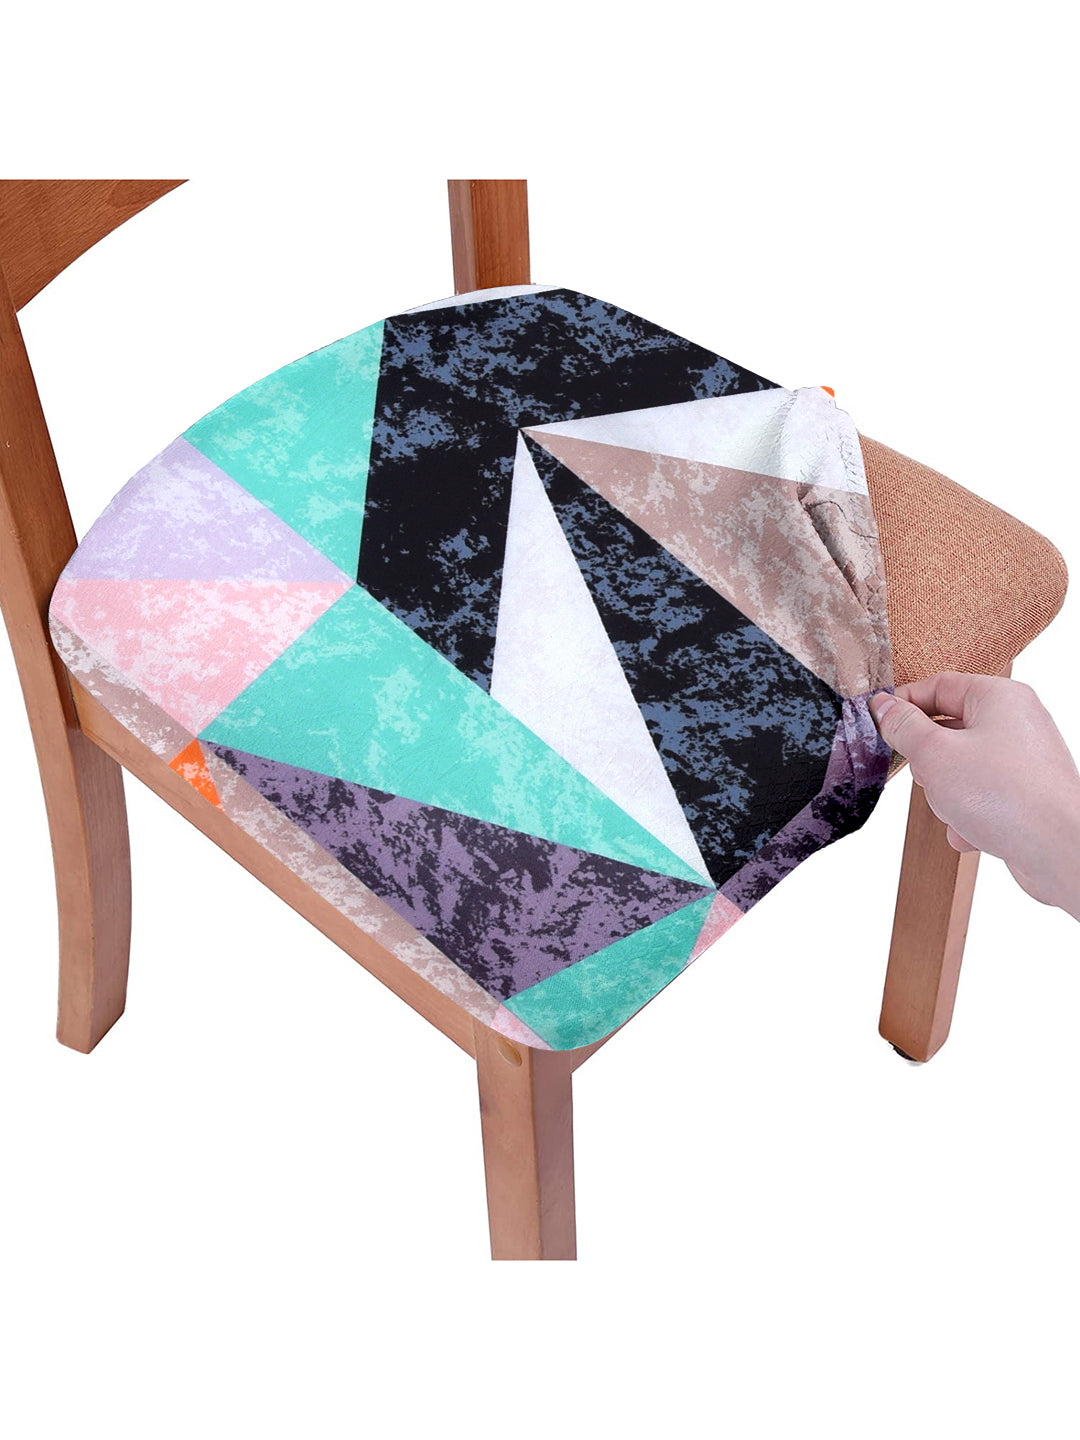 Stretchable Geometric Printed Non Slip Chair Pad Cover Pack of 1- Multicolour